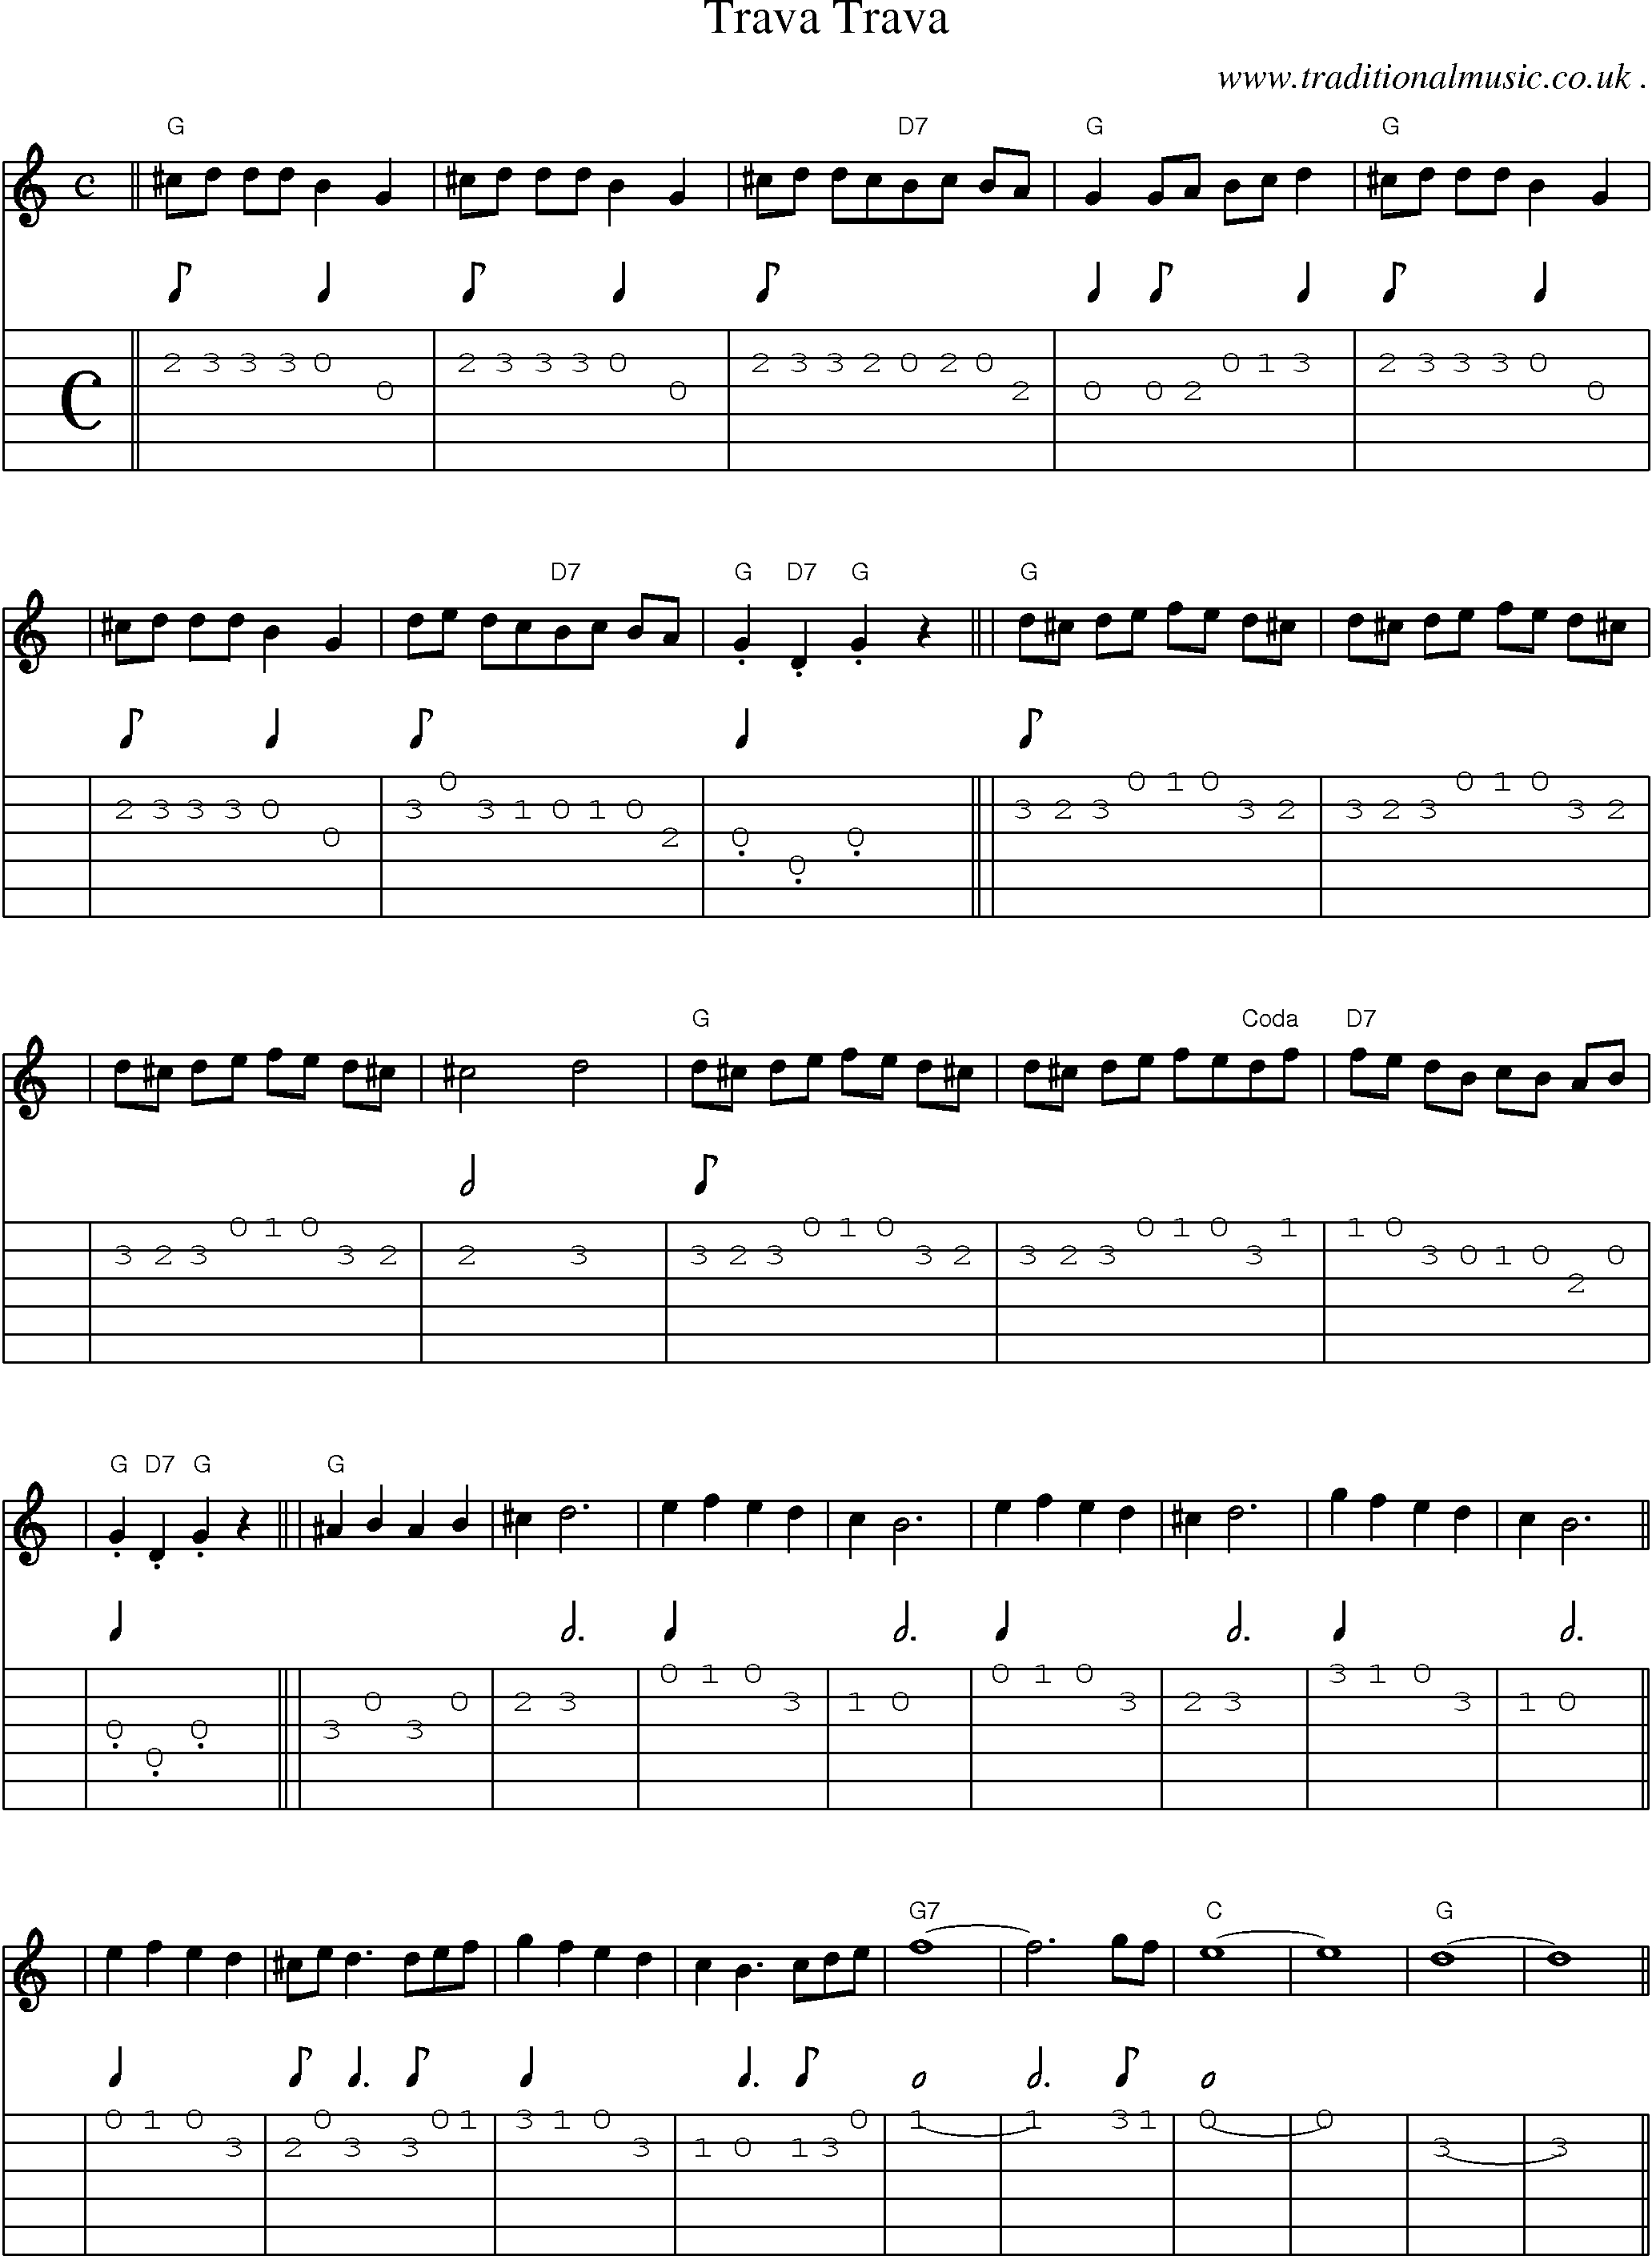 Sheet-Music and Guitar Tabs for Trava Trava